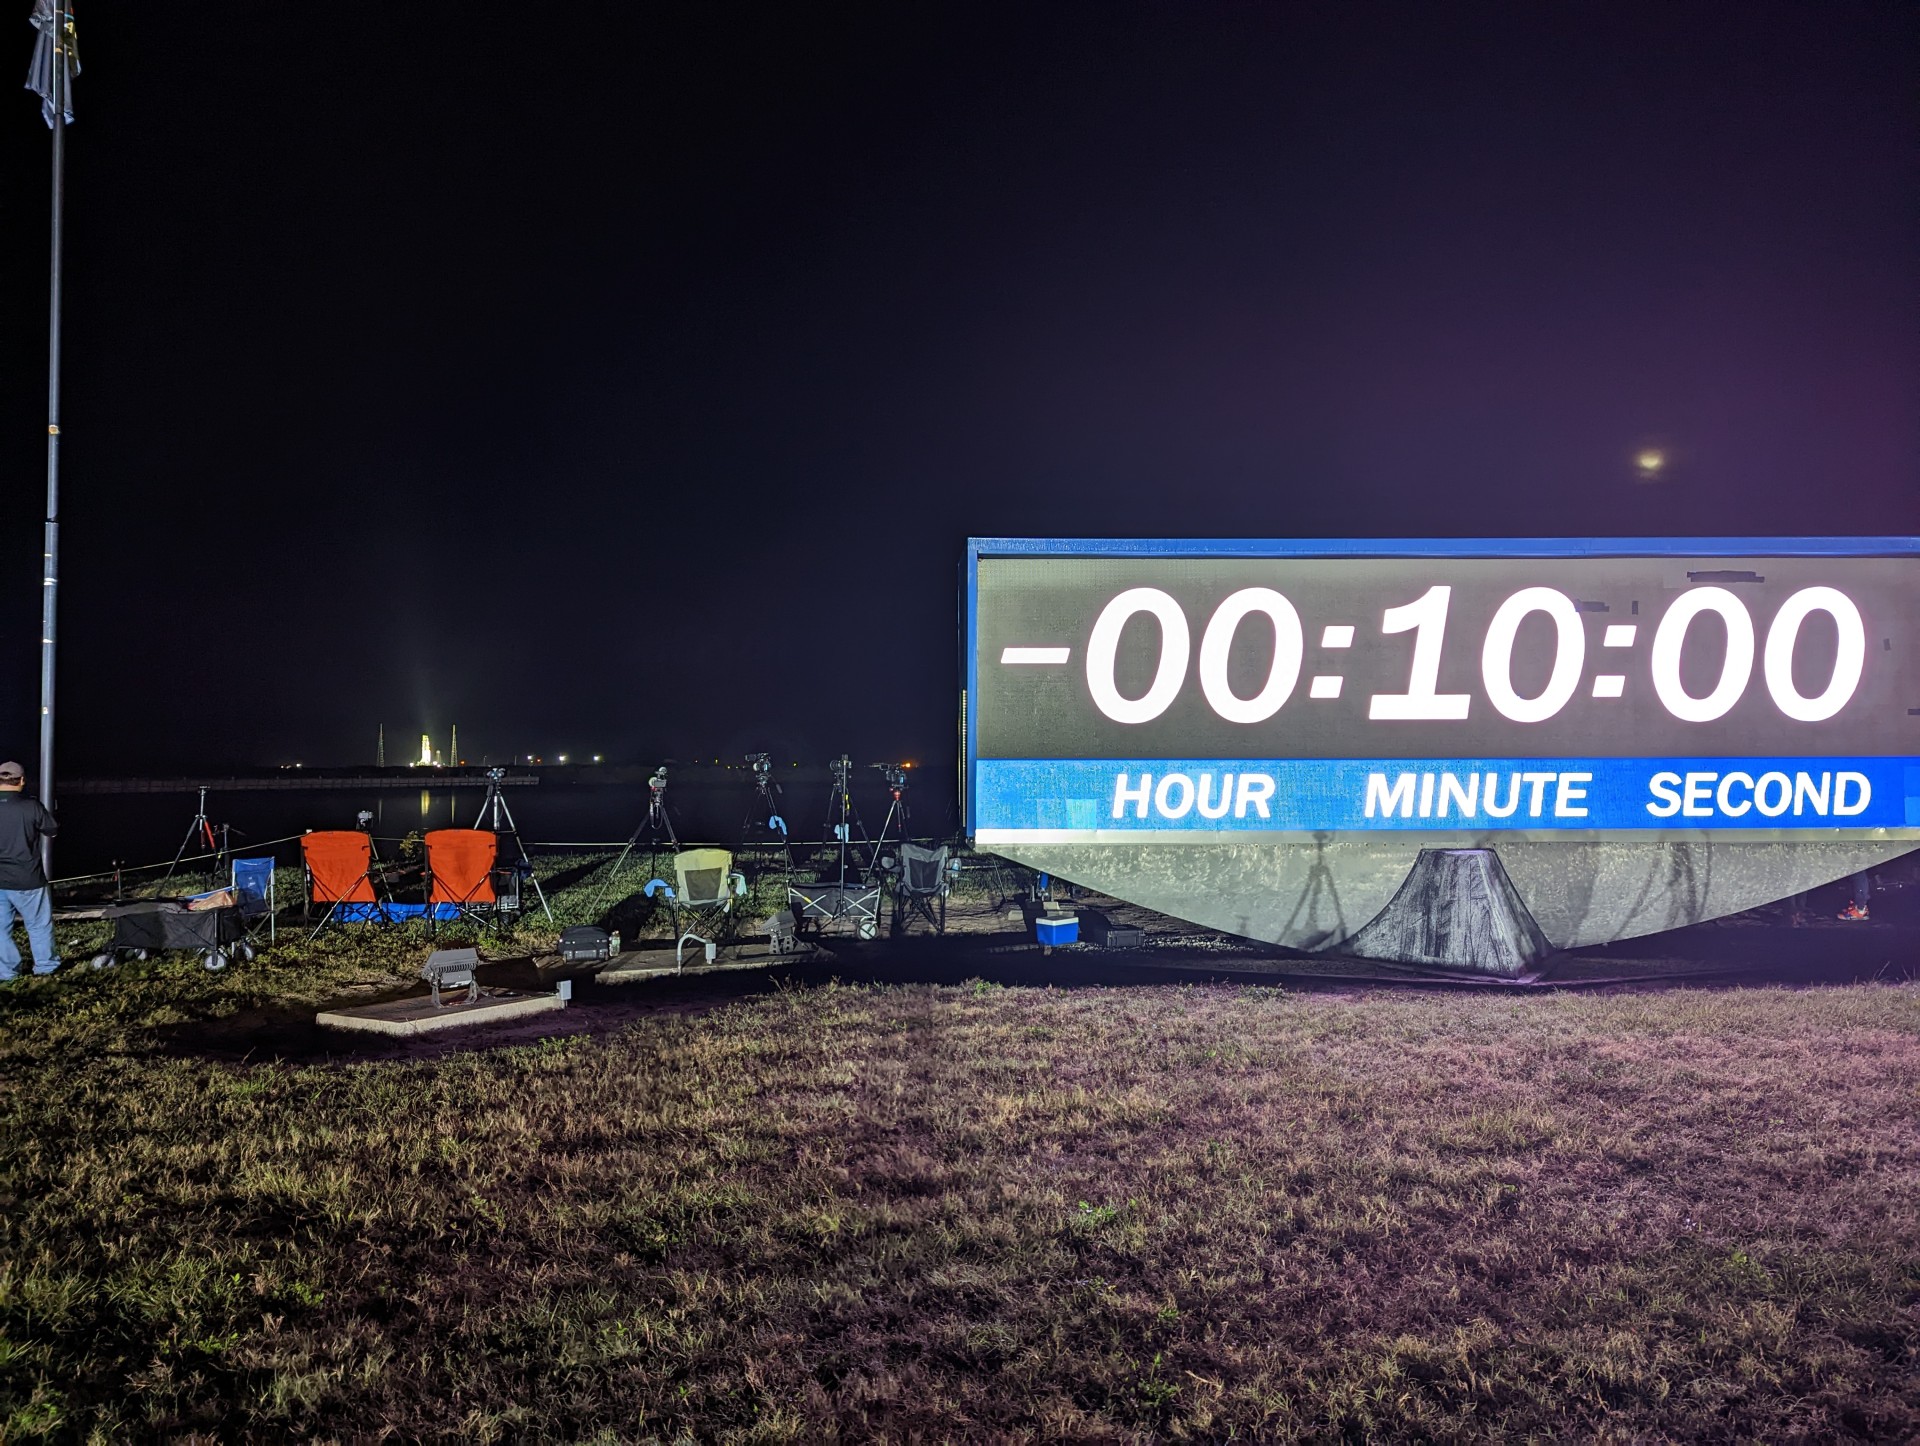 The countdown clock at the press site of Kennedy Space Center while in a planned T-10 hold during the launch countdown for Artemis 1.